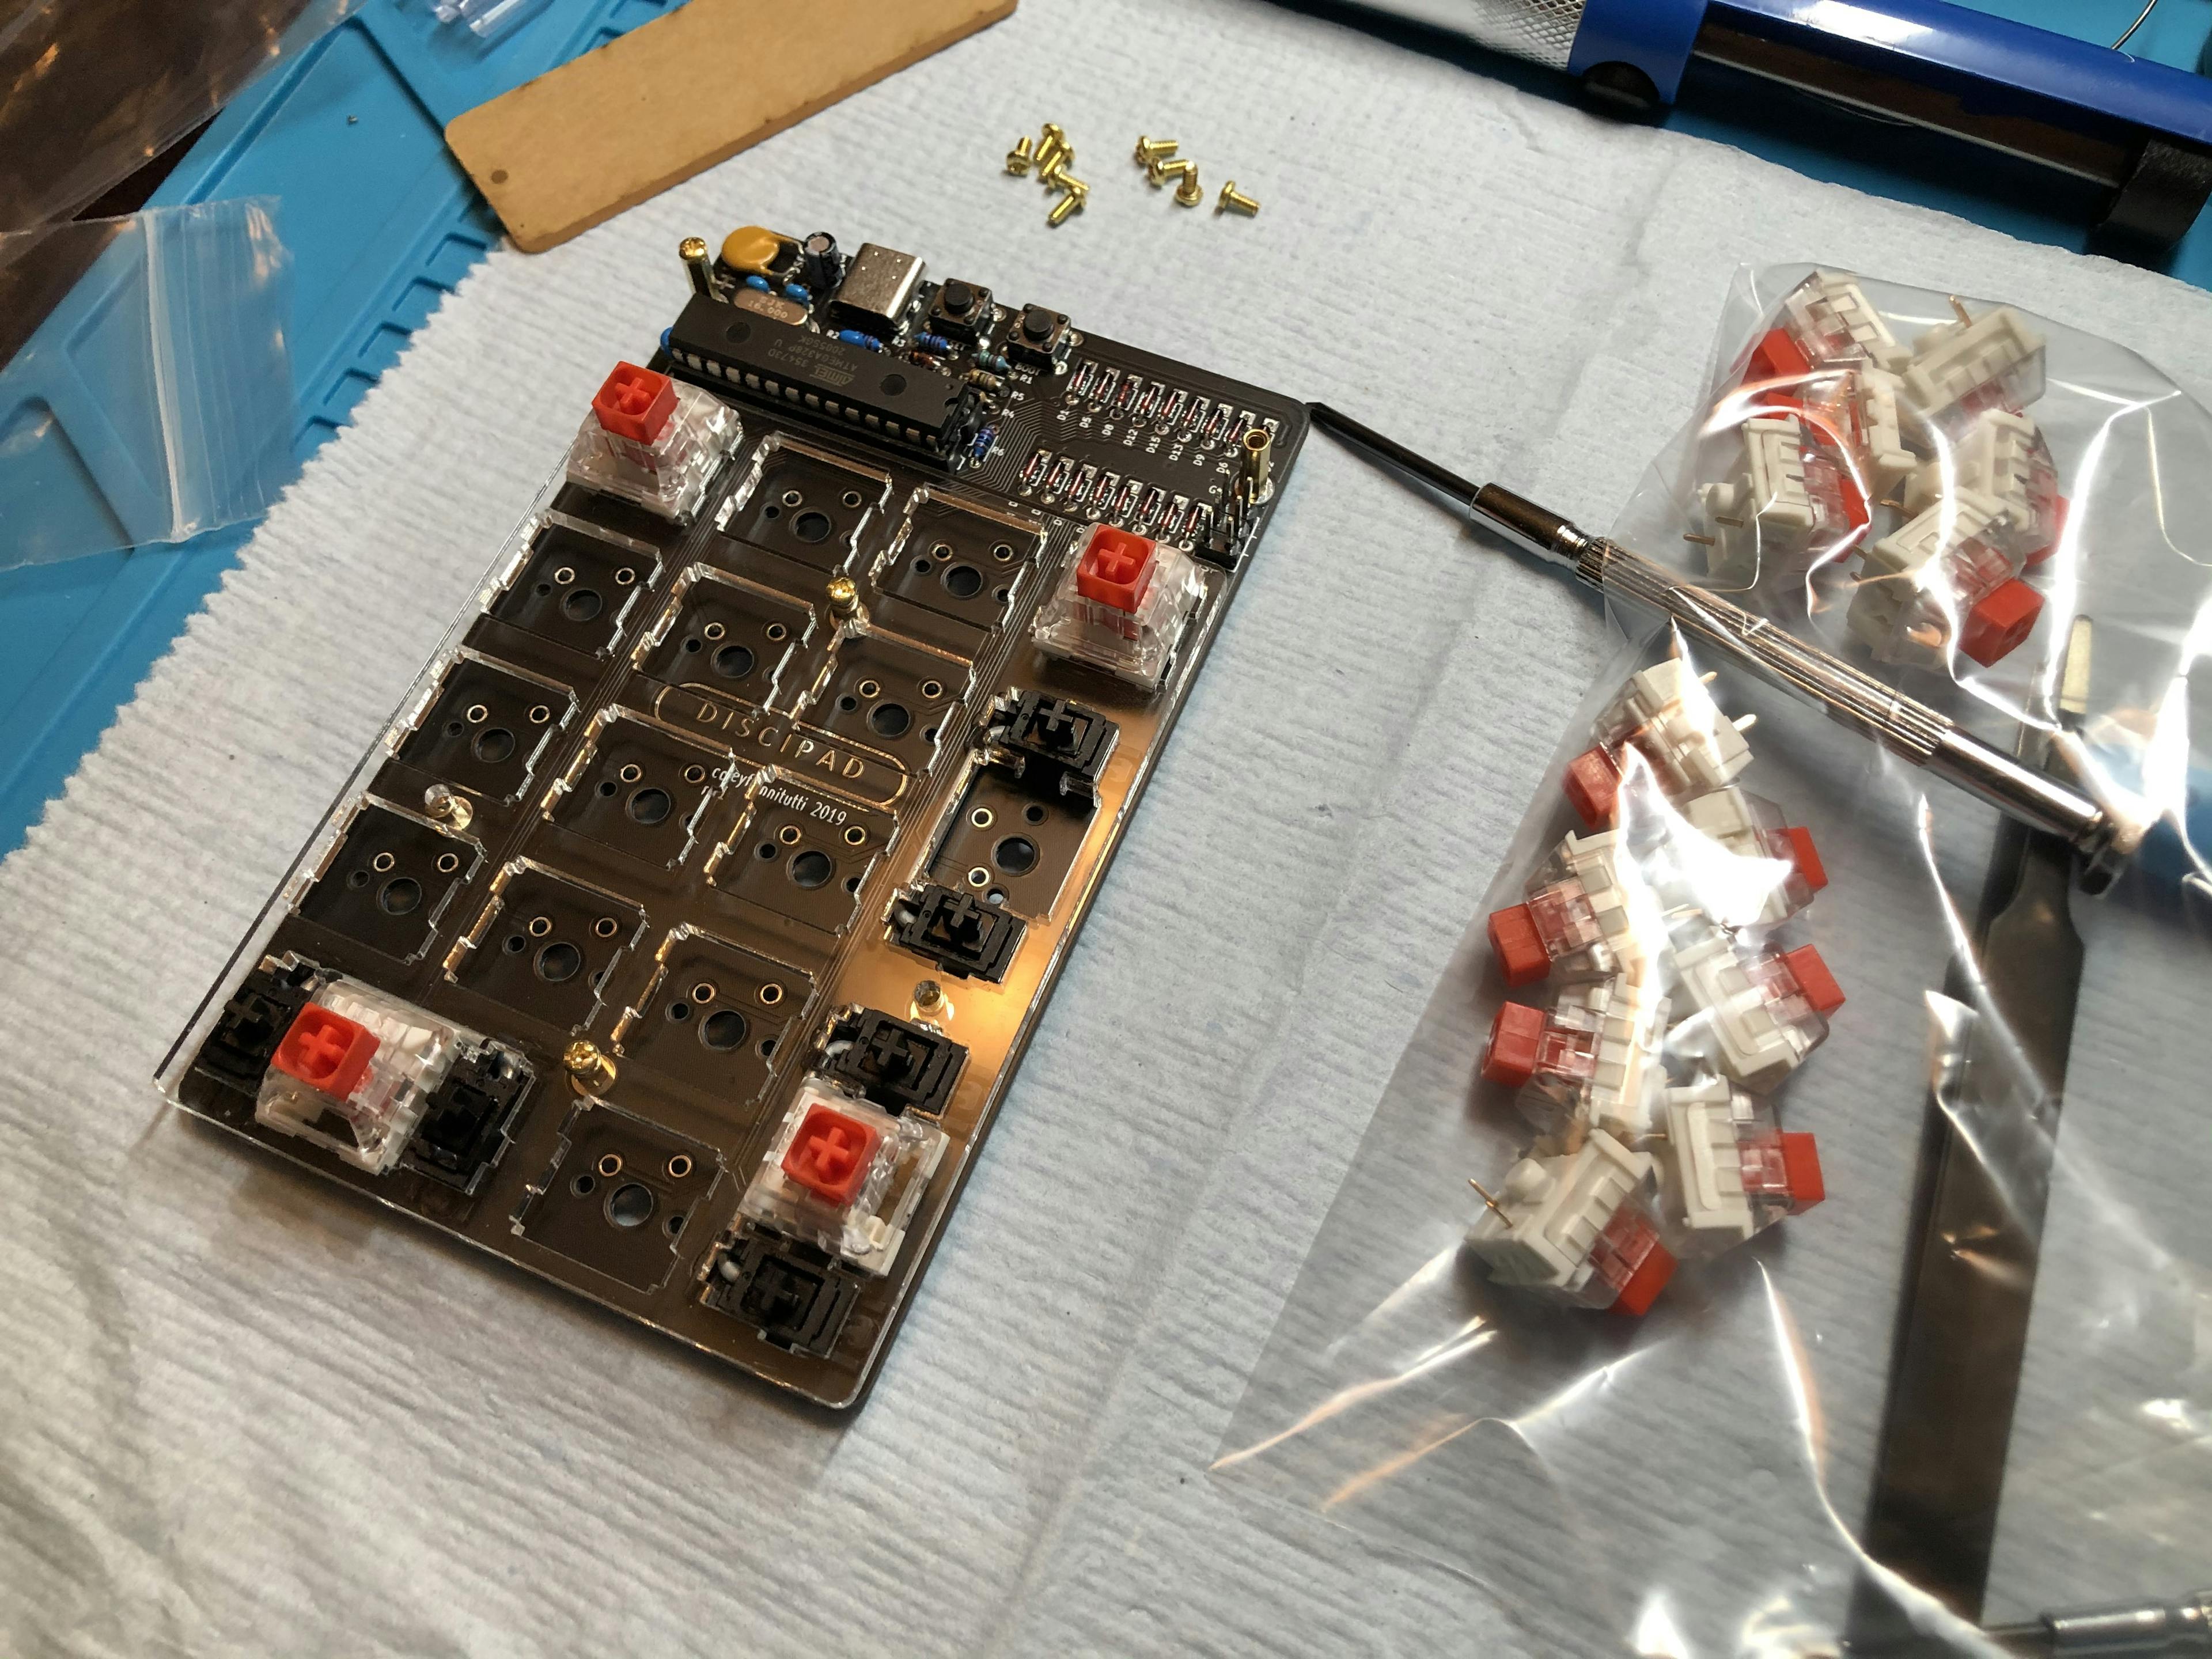 Soldering keyboard switches and attaching stabilizers